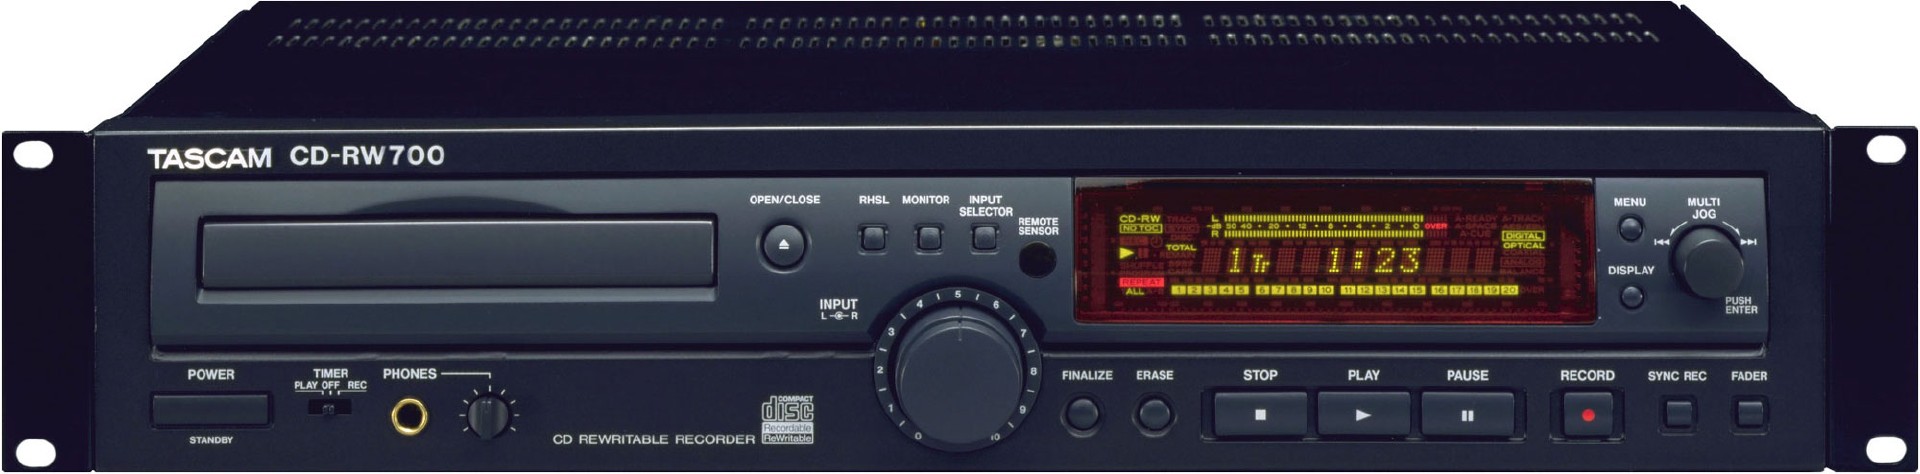 CD-RW700 | FEATURES | TASCAM - United States